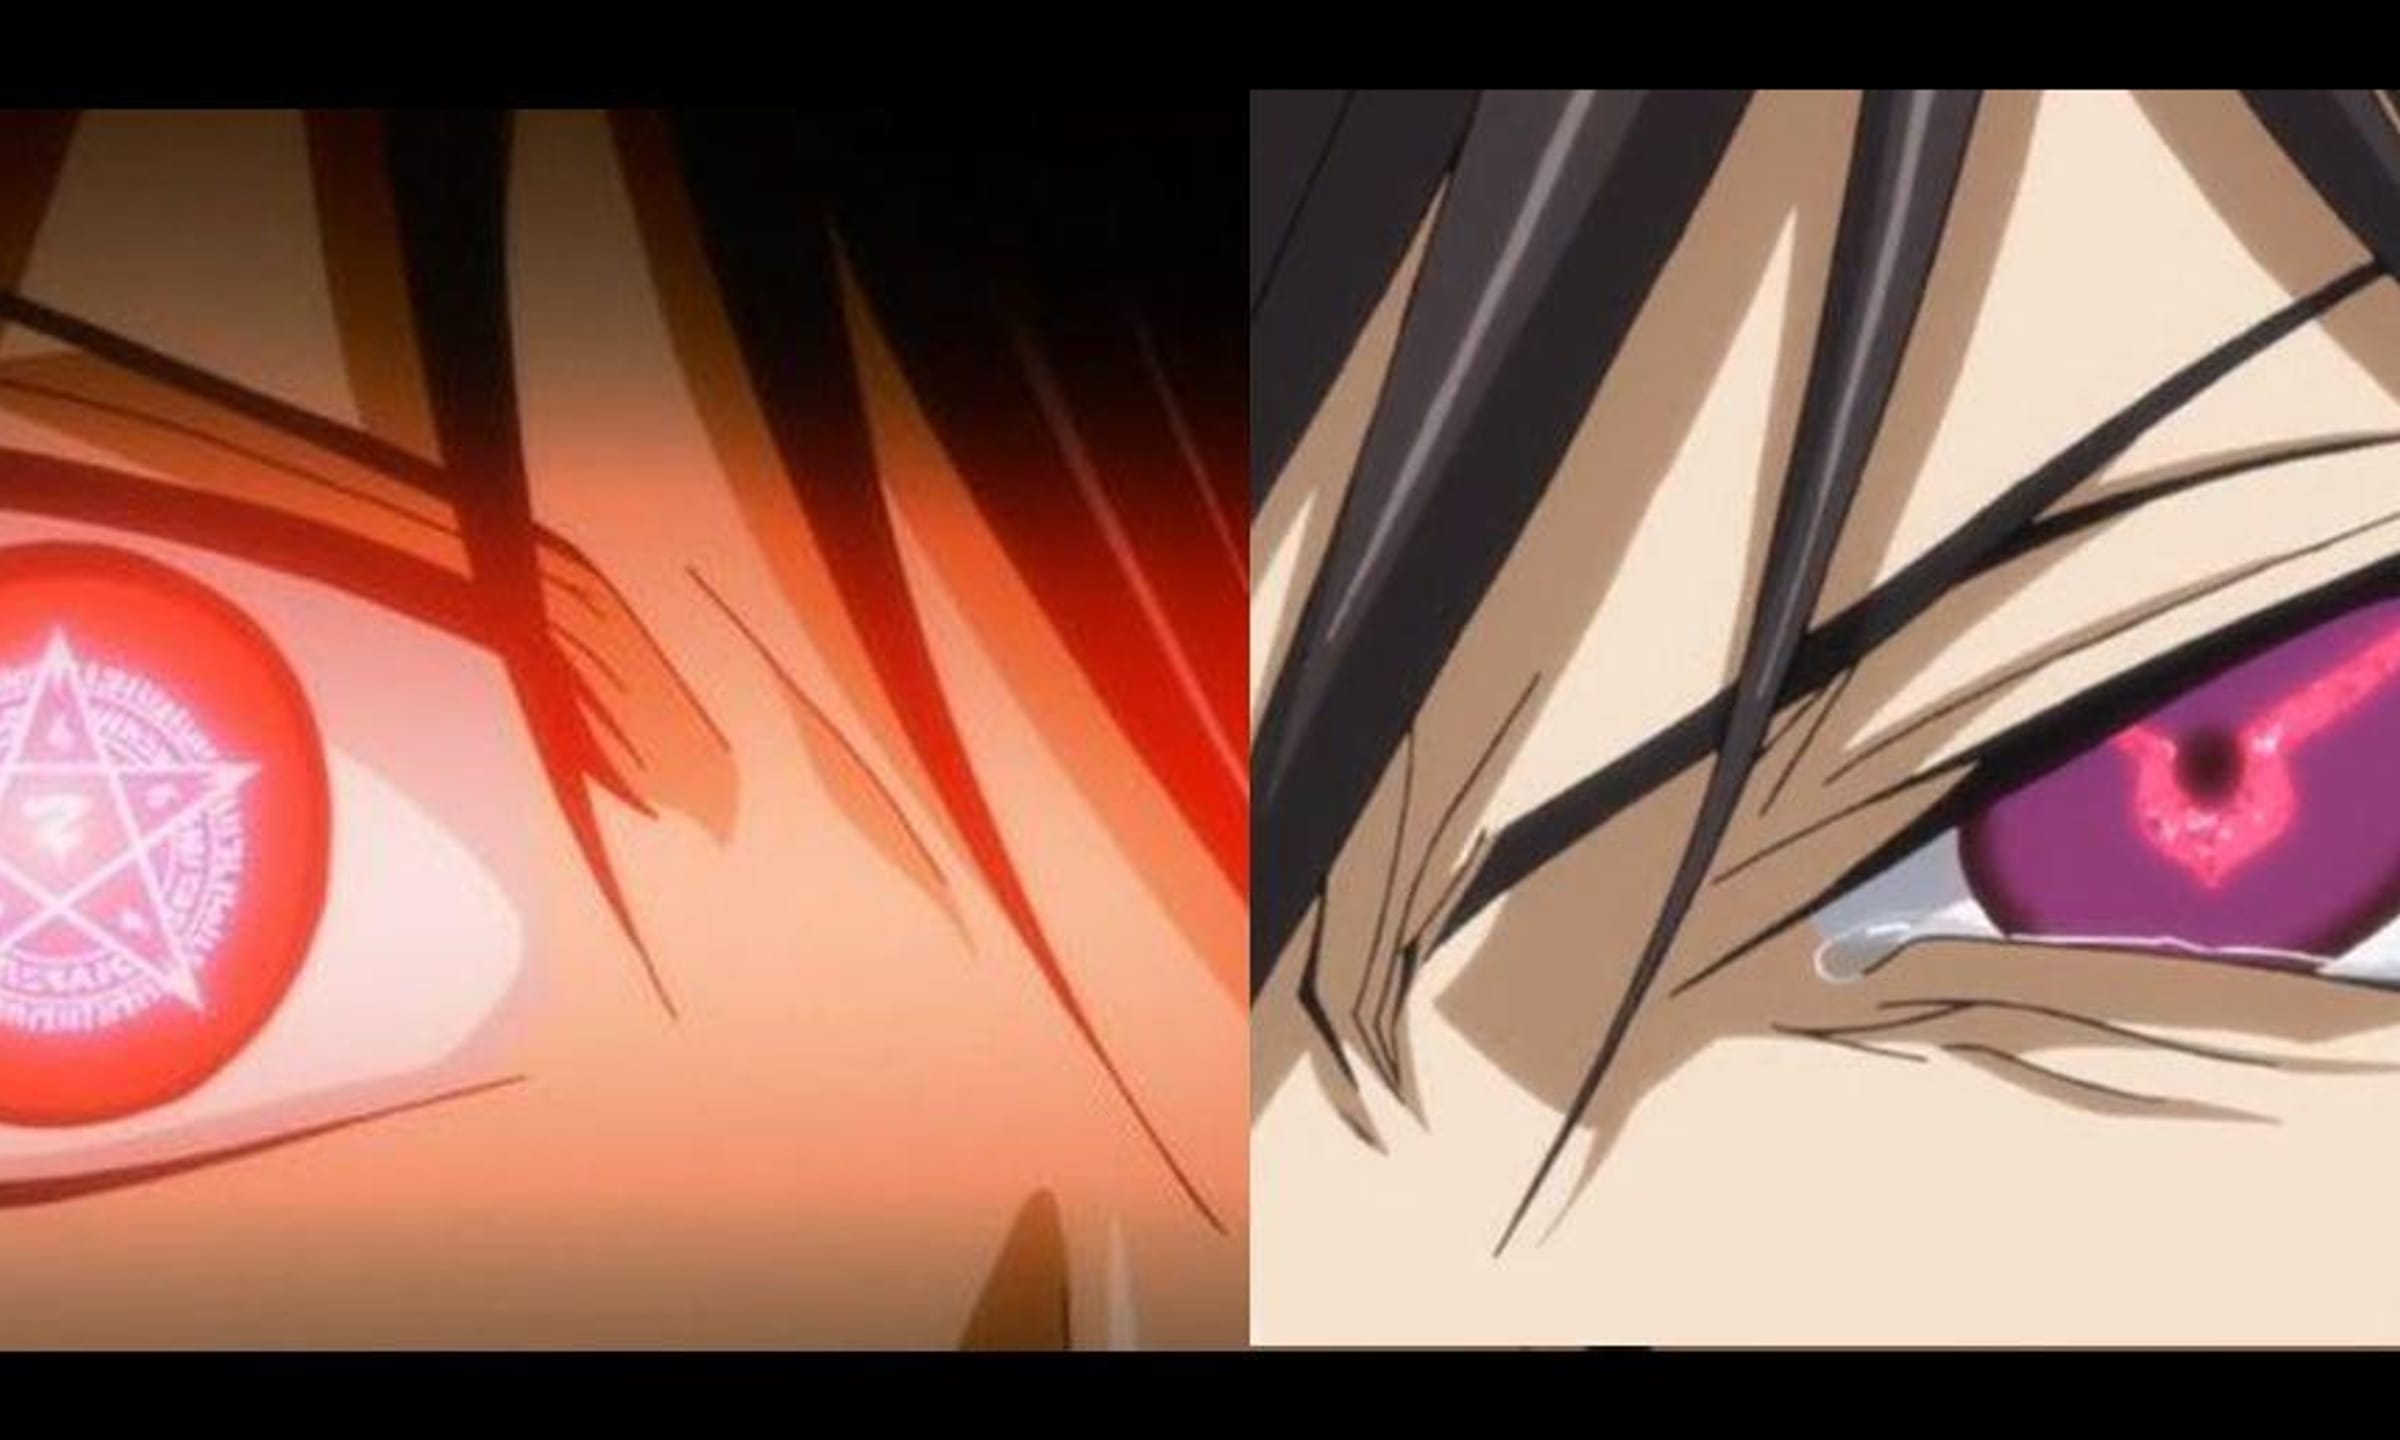 12 Anime Characters With Powerful and Destructive Eyes